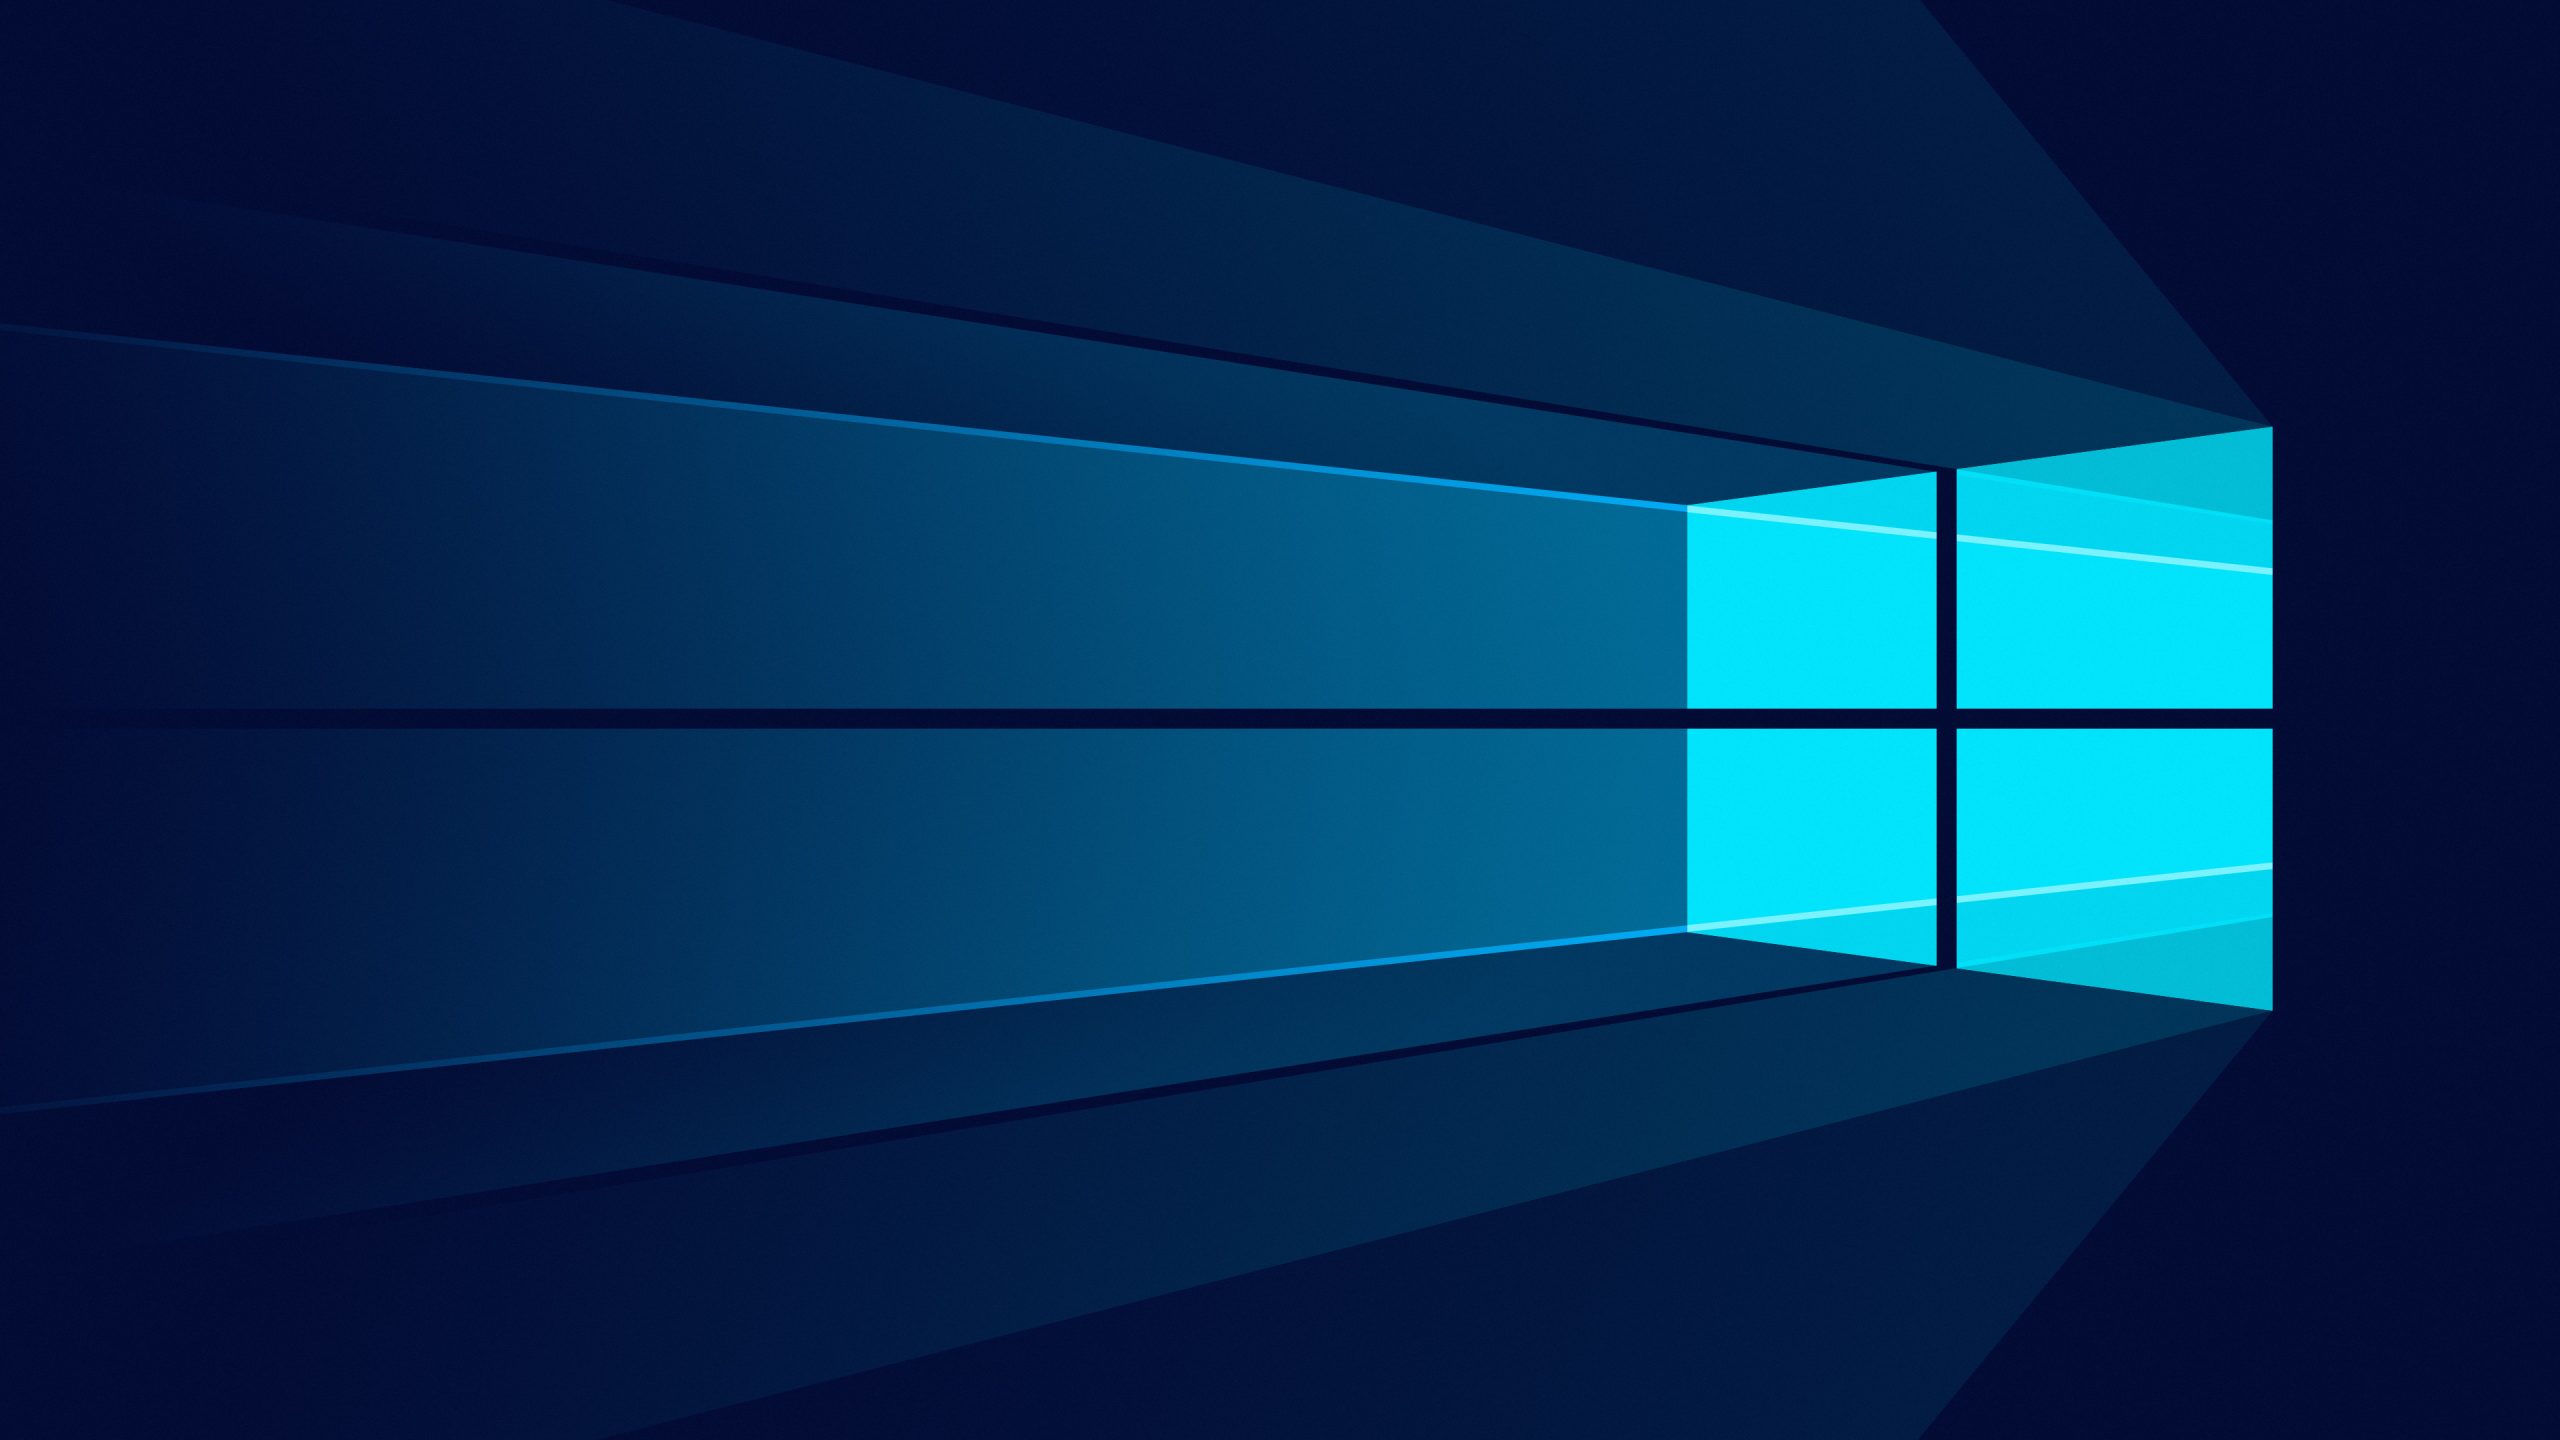 Where to Find Windows 10 Product Key?